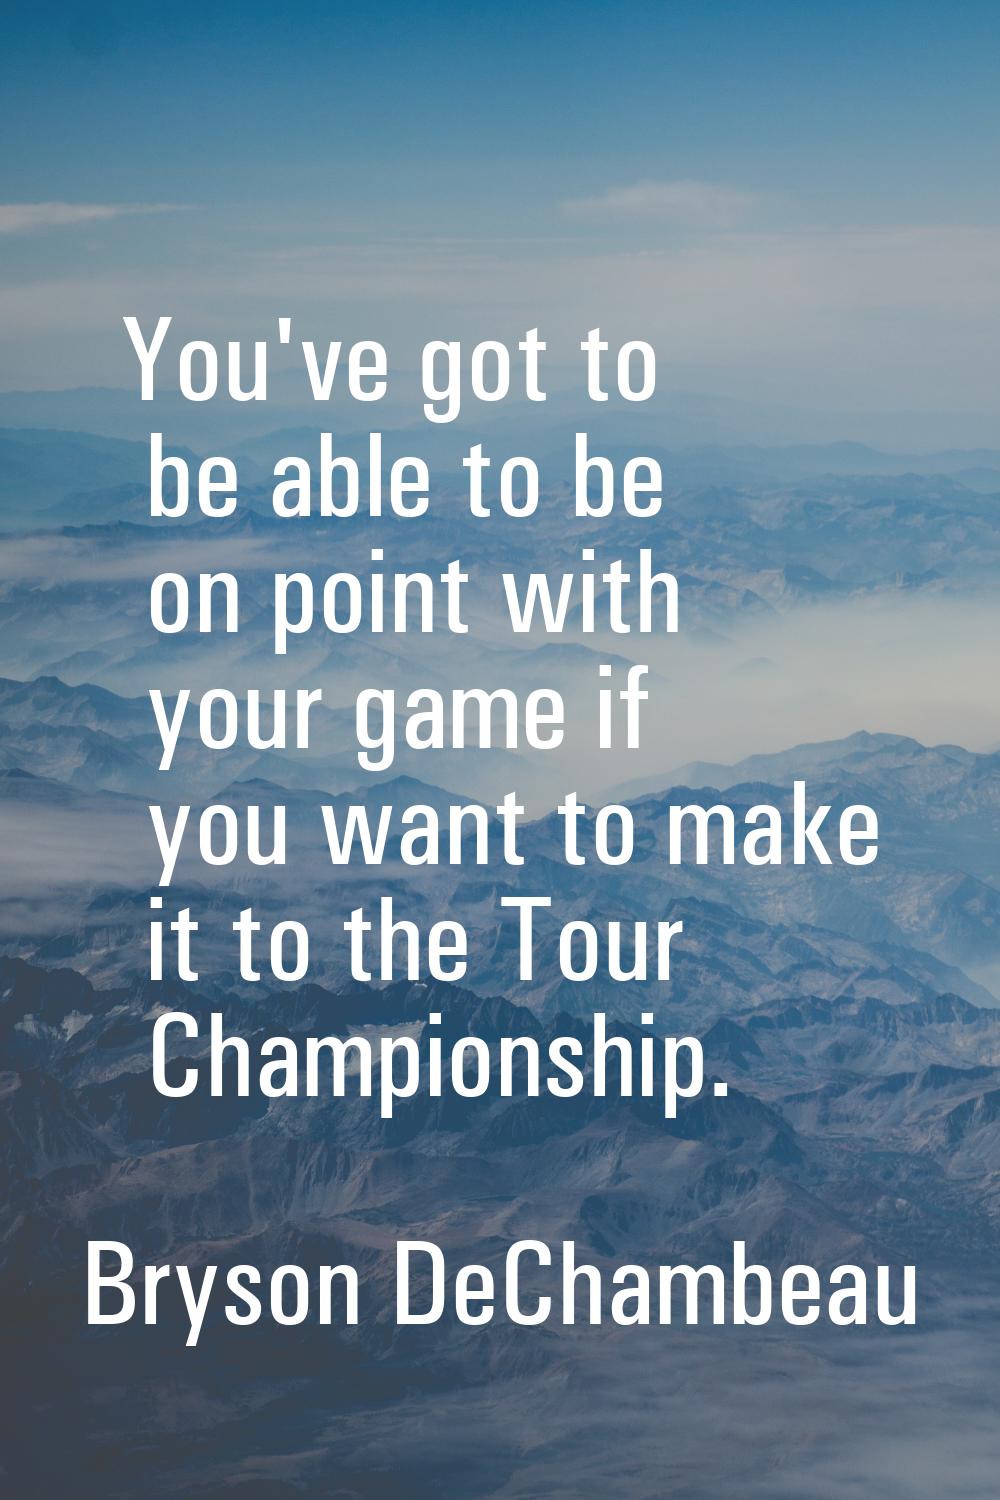 You've got to be able to be on point with your game if you want to make it to the Tour Championship